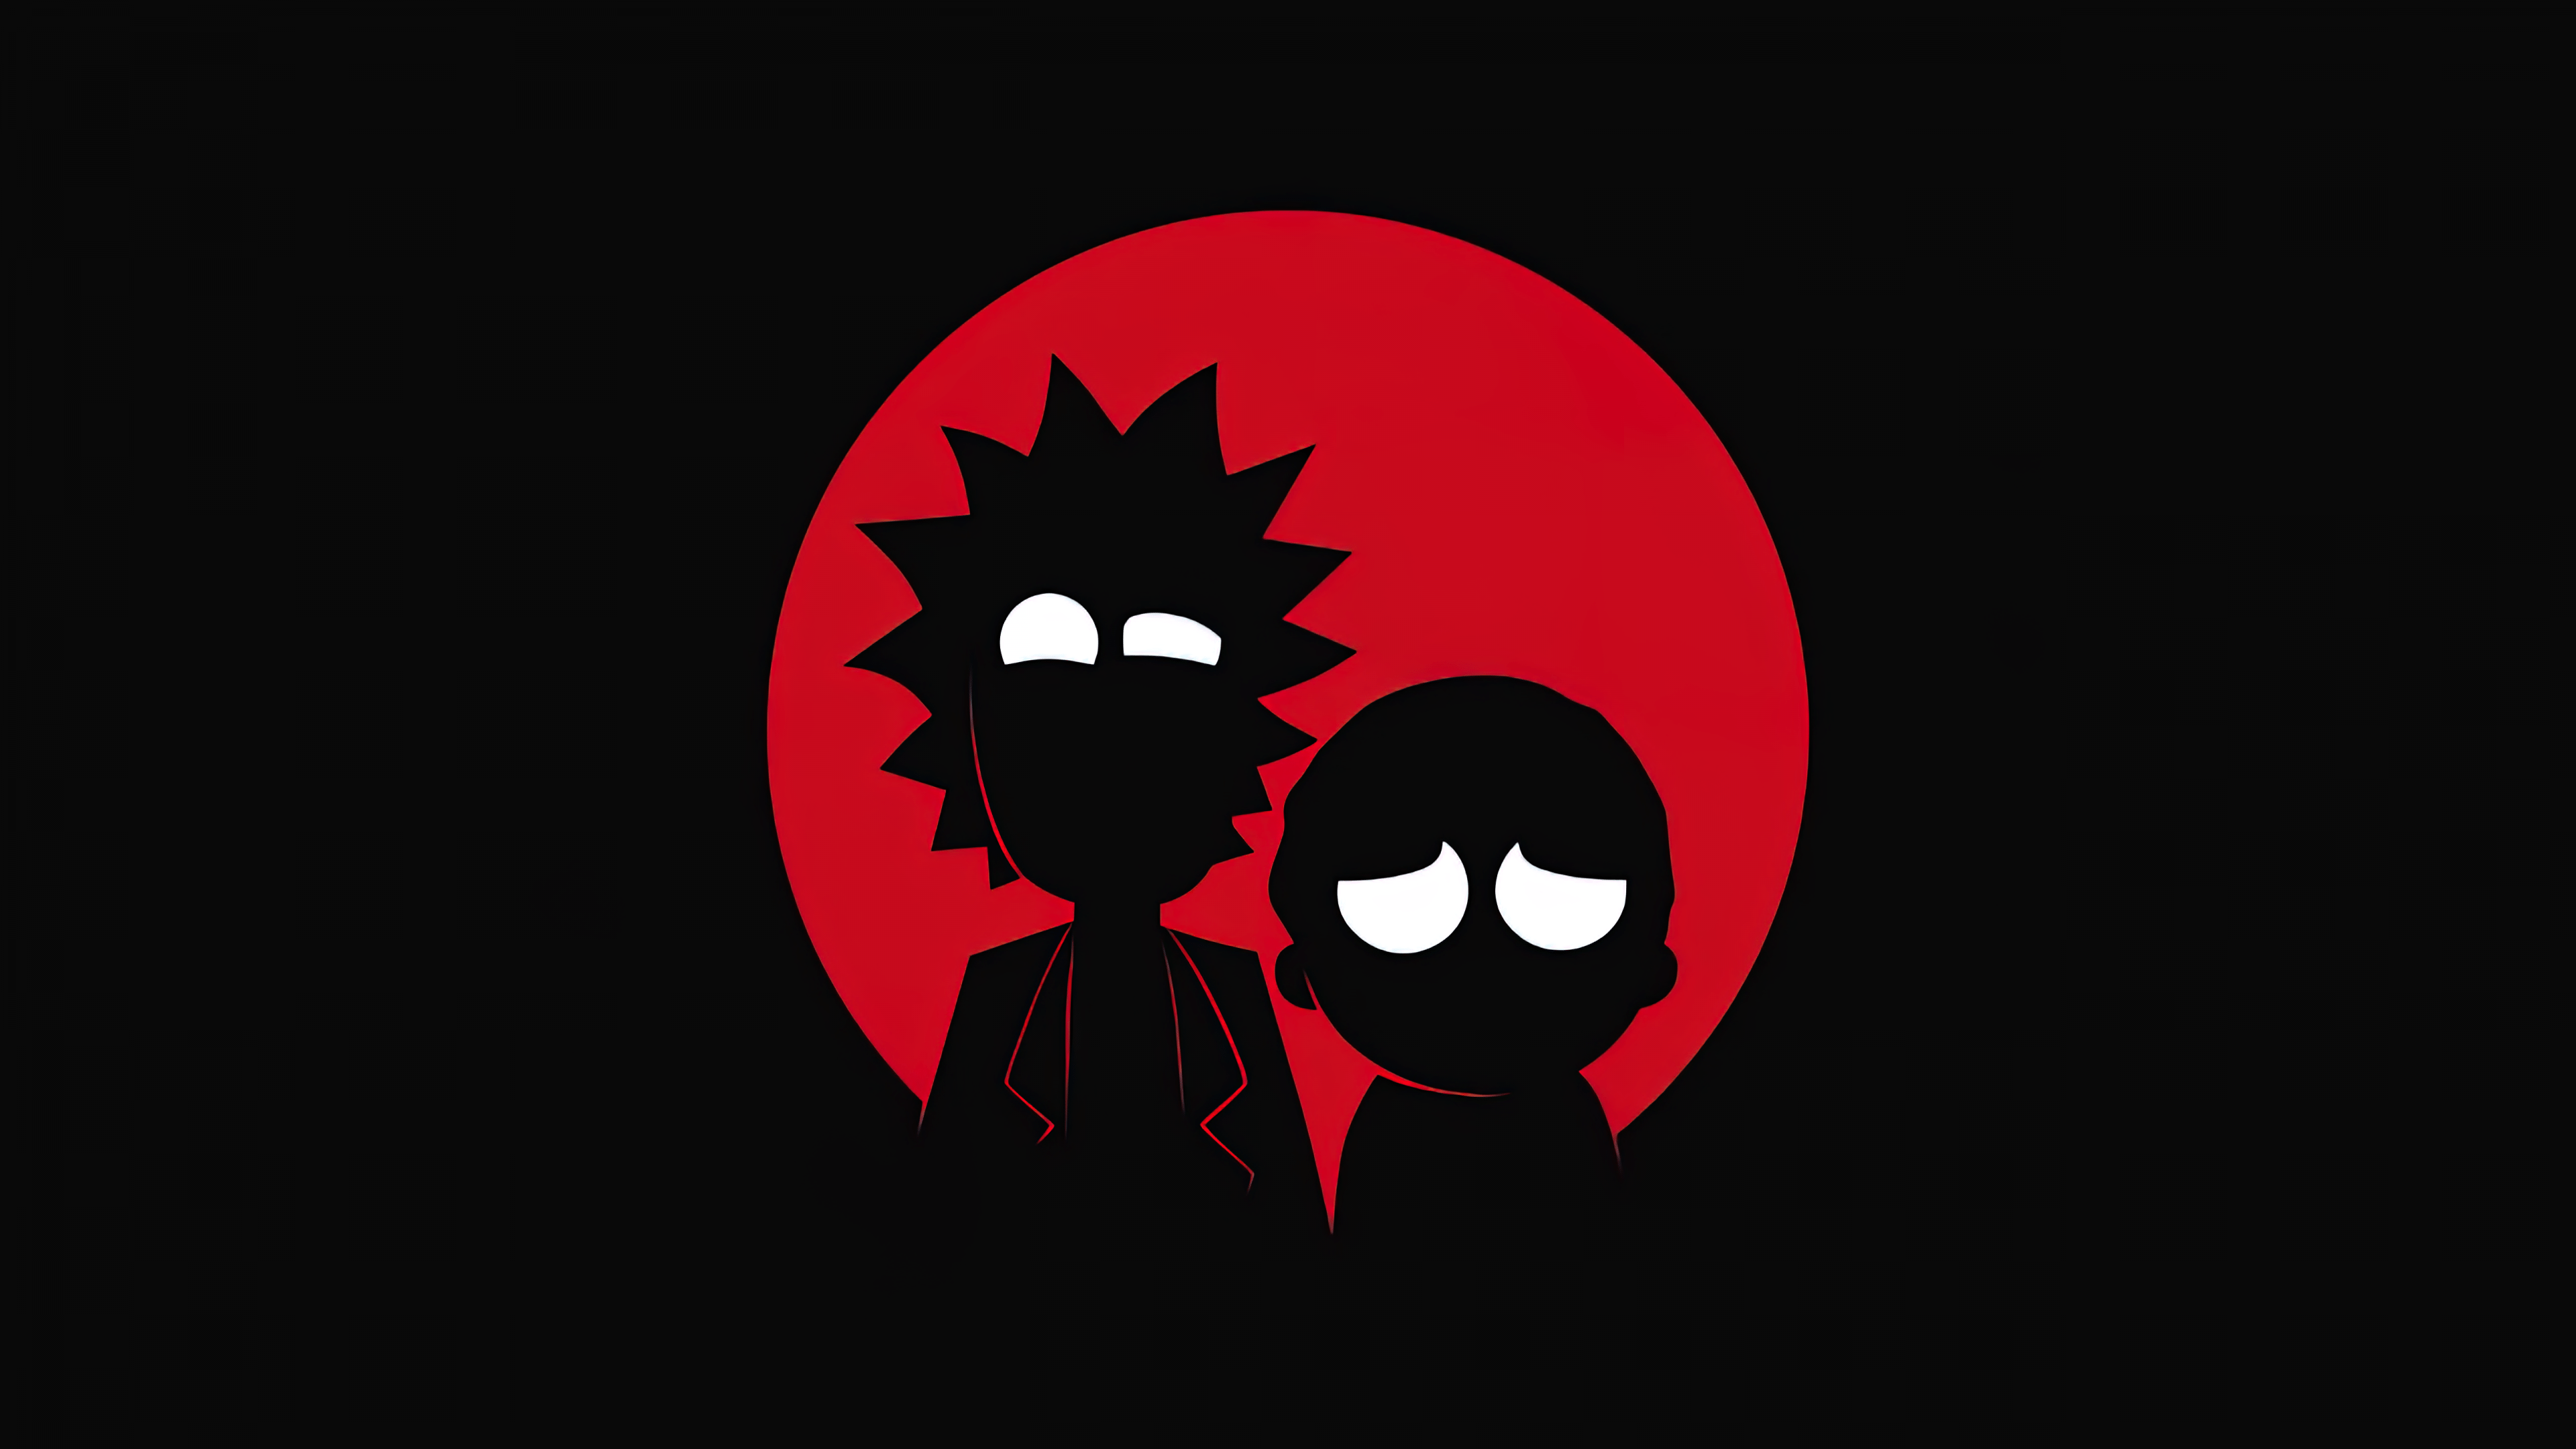 Rick and morty wallpaper 1920x1080 for android - Rick and Morty